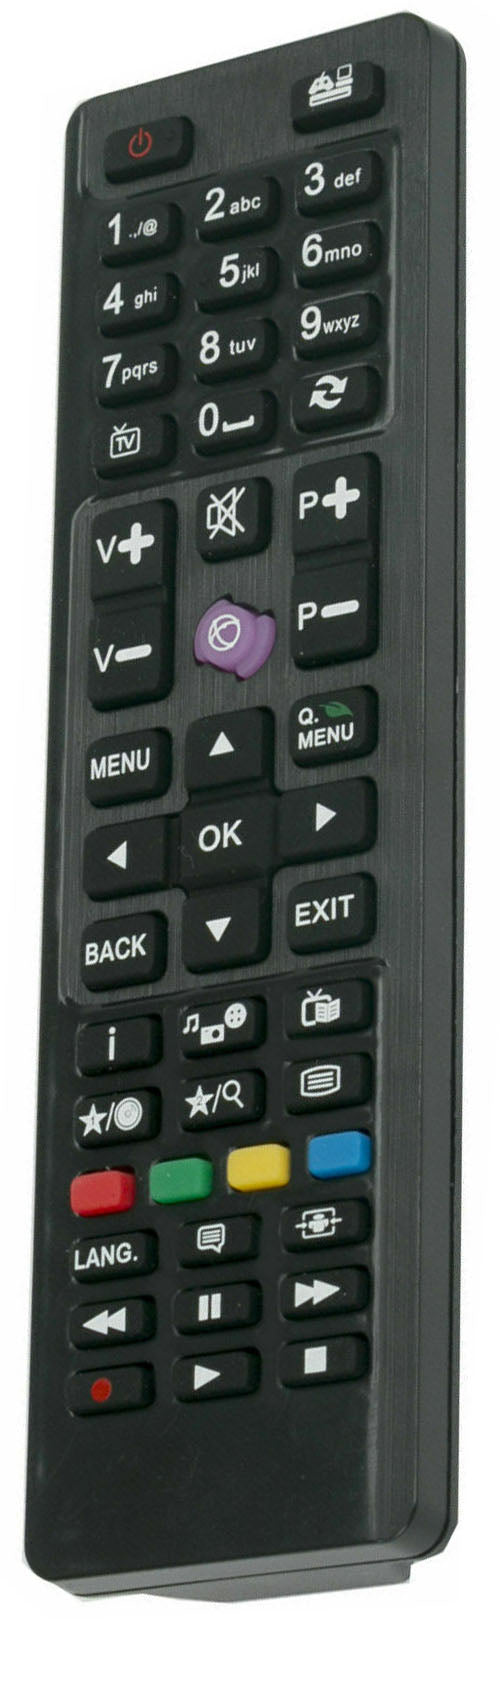 Bush TV Remote Control UK 32272HDDVDL DLED32165HDY 32278HDDLED